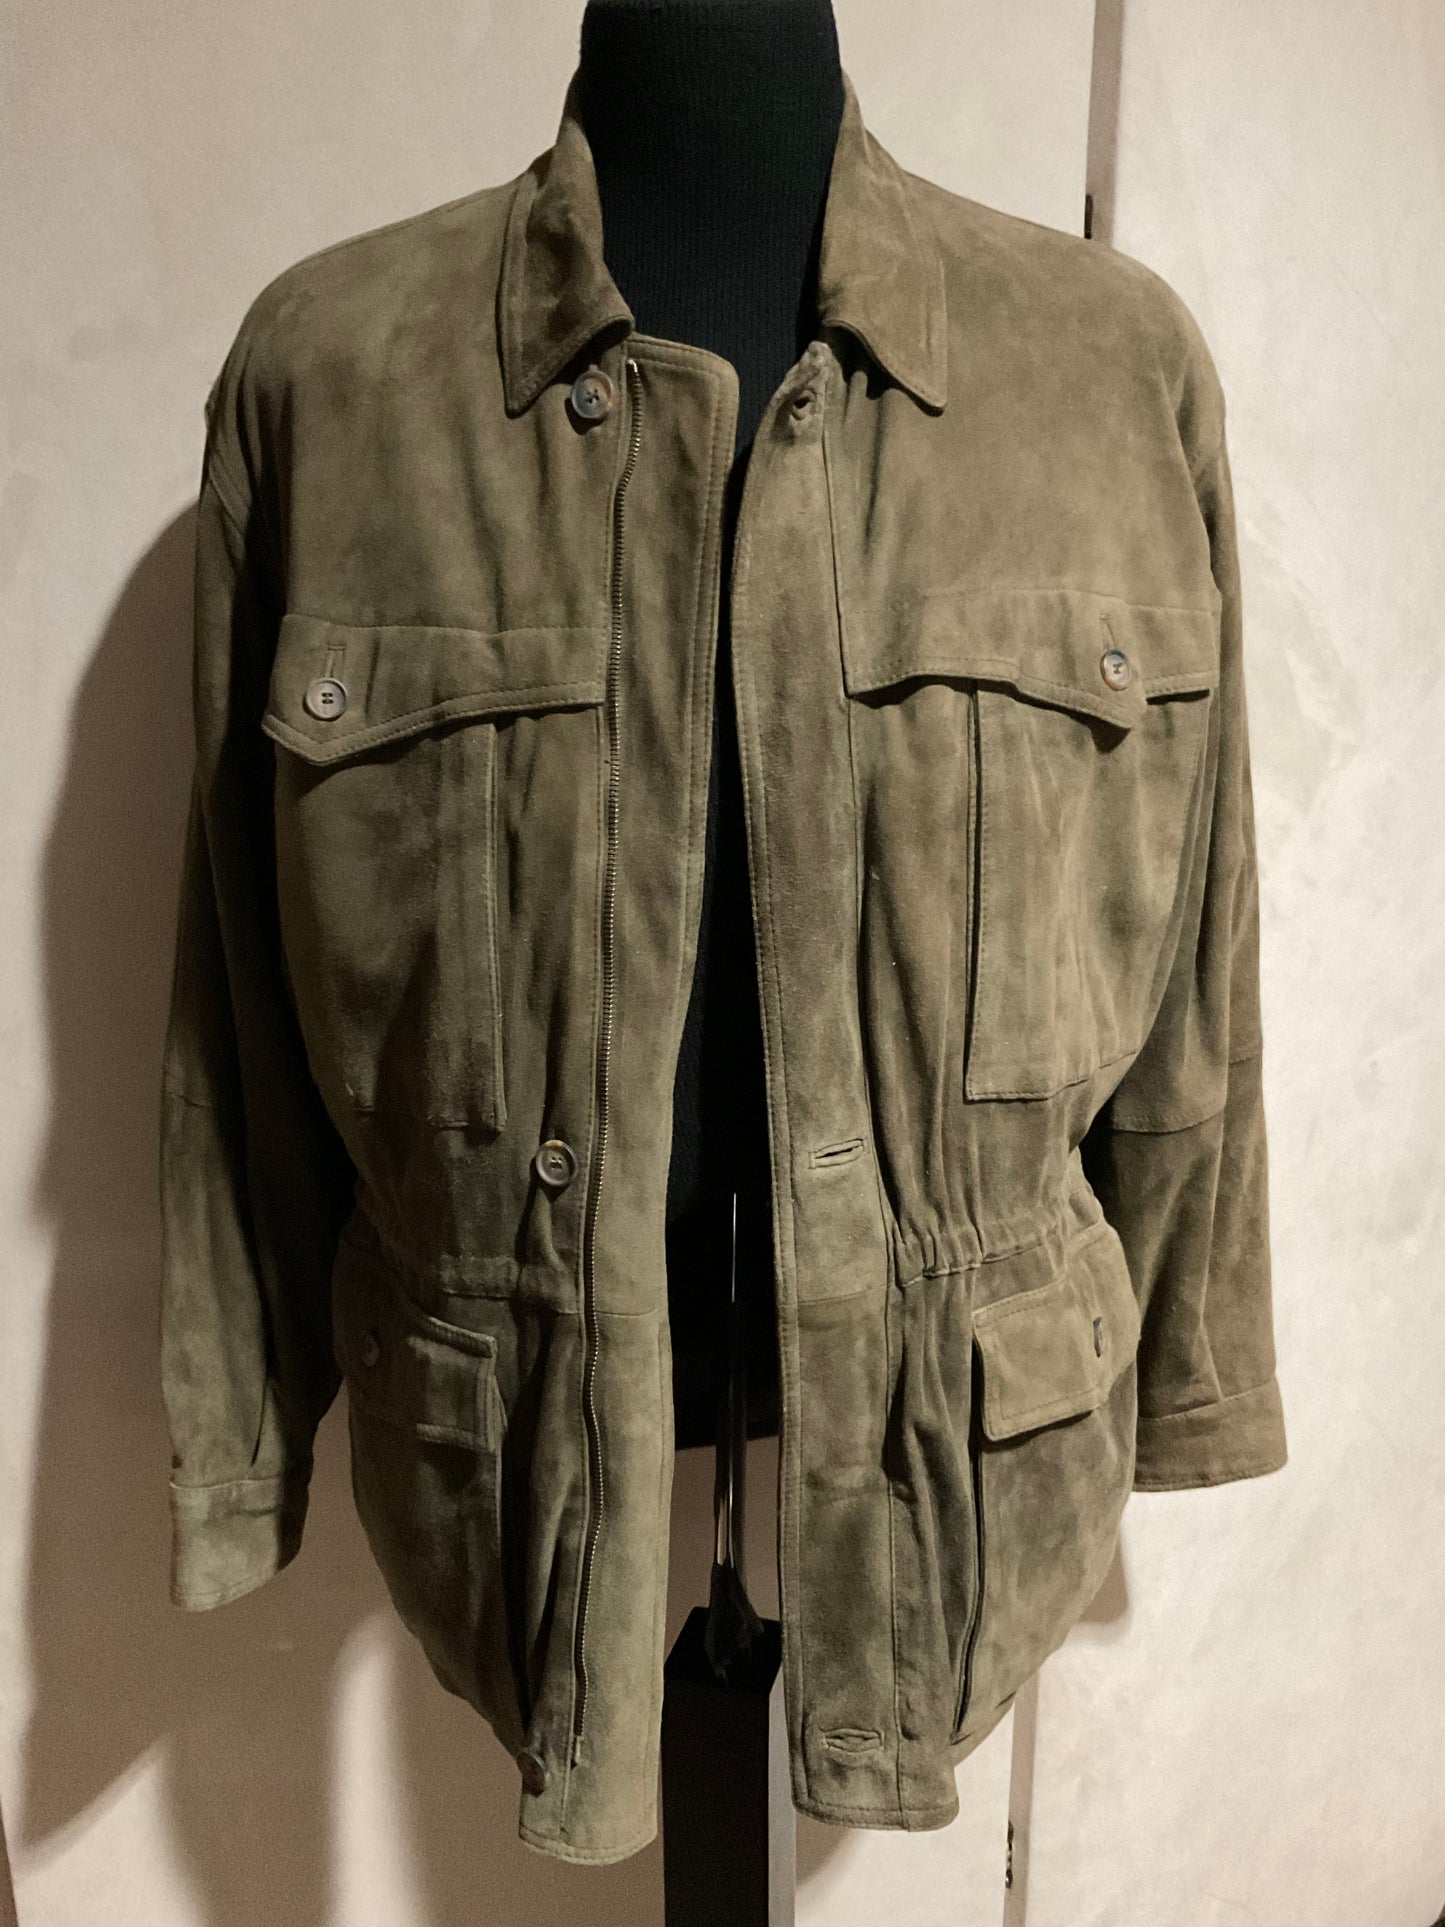 R P SUEDE BUSH JACKET / MEDIUM / OLIVE / NEW / MADE IN ITALY